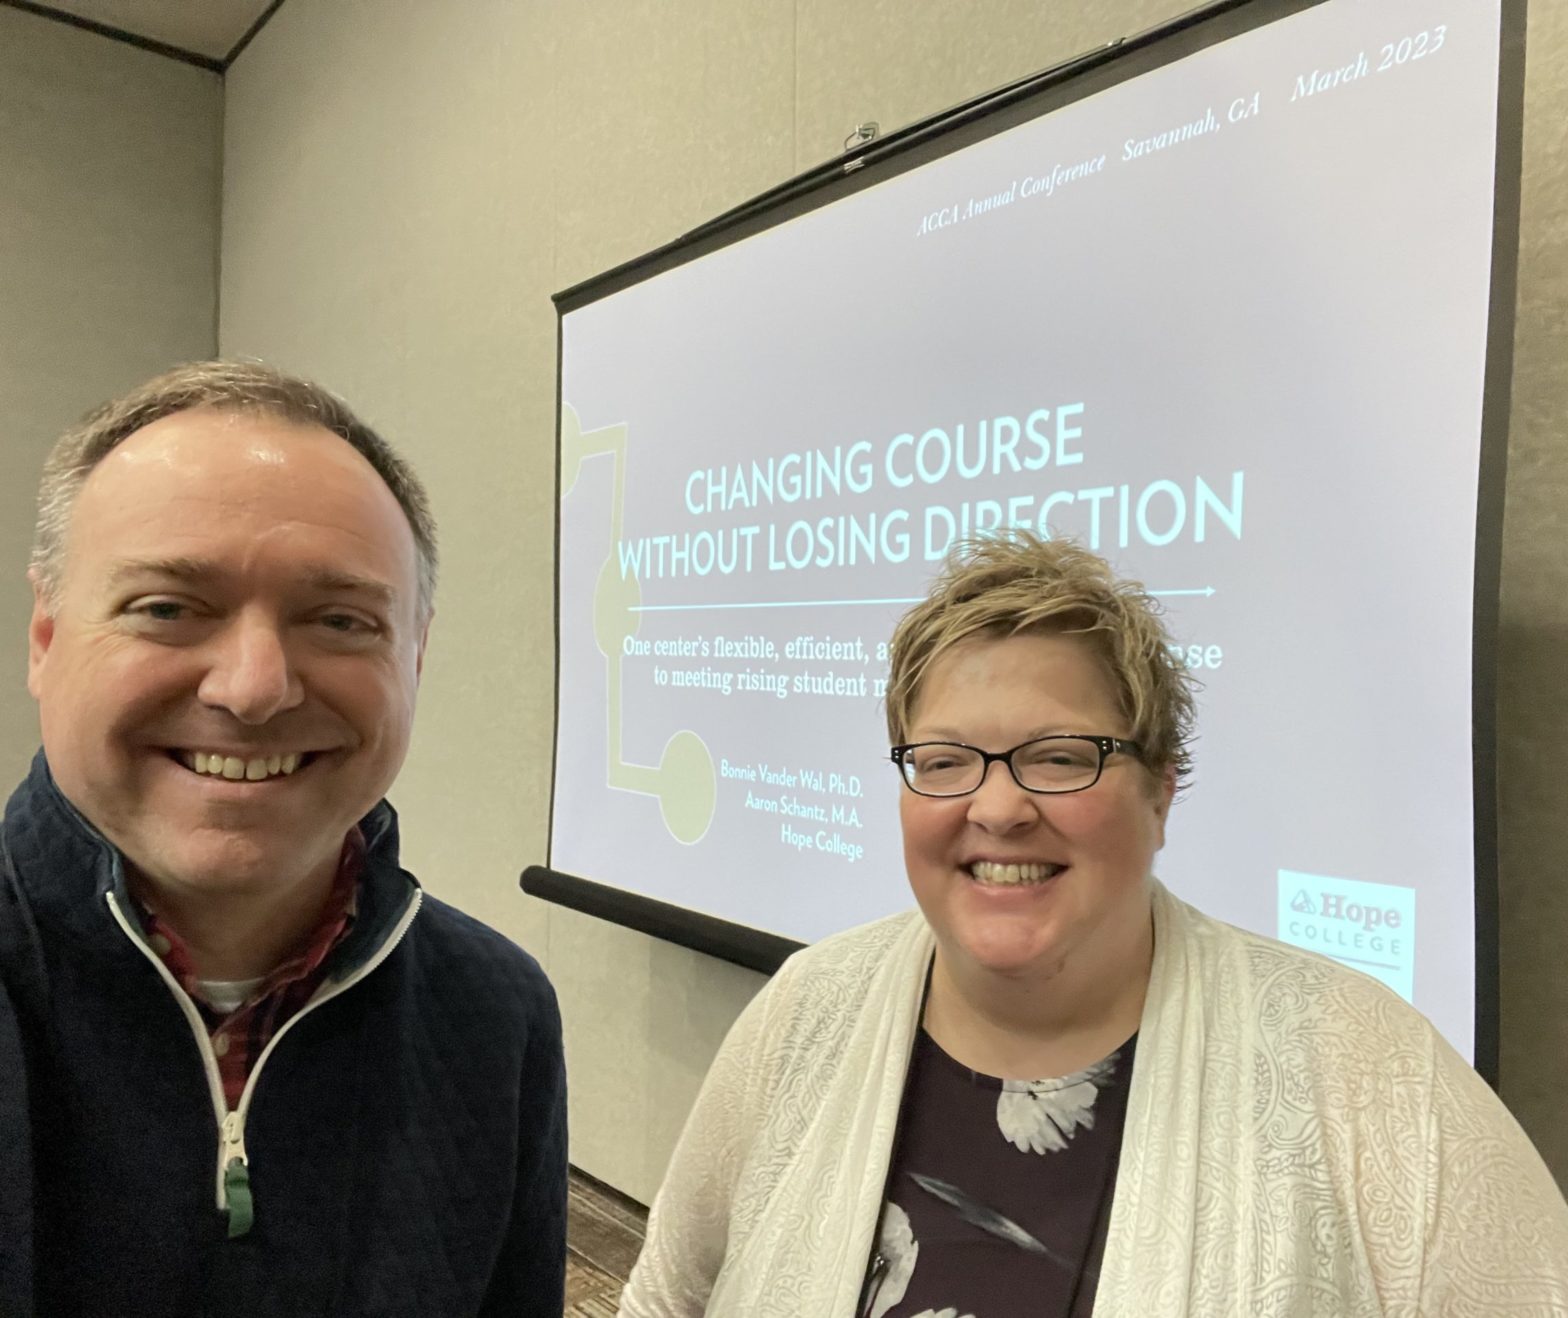 A close-up (selfie) of Aaron and Bonnie before their presentation. Aaron is on the left and Bonnie on the right with the screen in the background that says "Changing Course without Losing Direction" the title of their presentation.